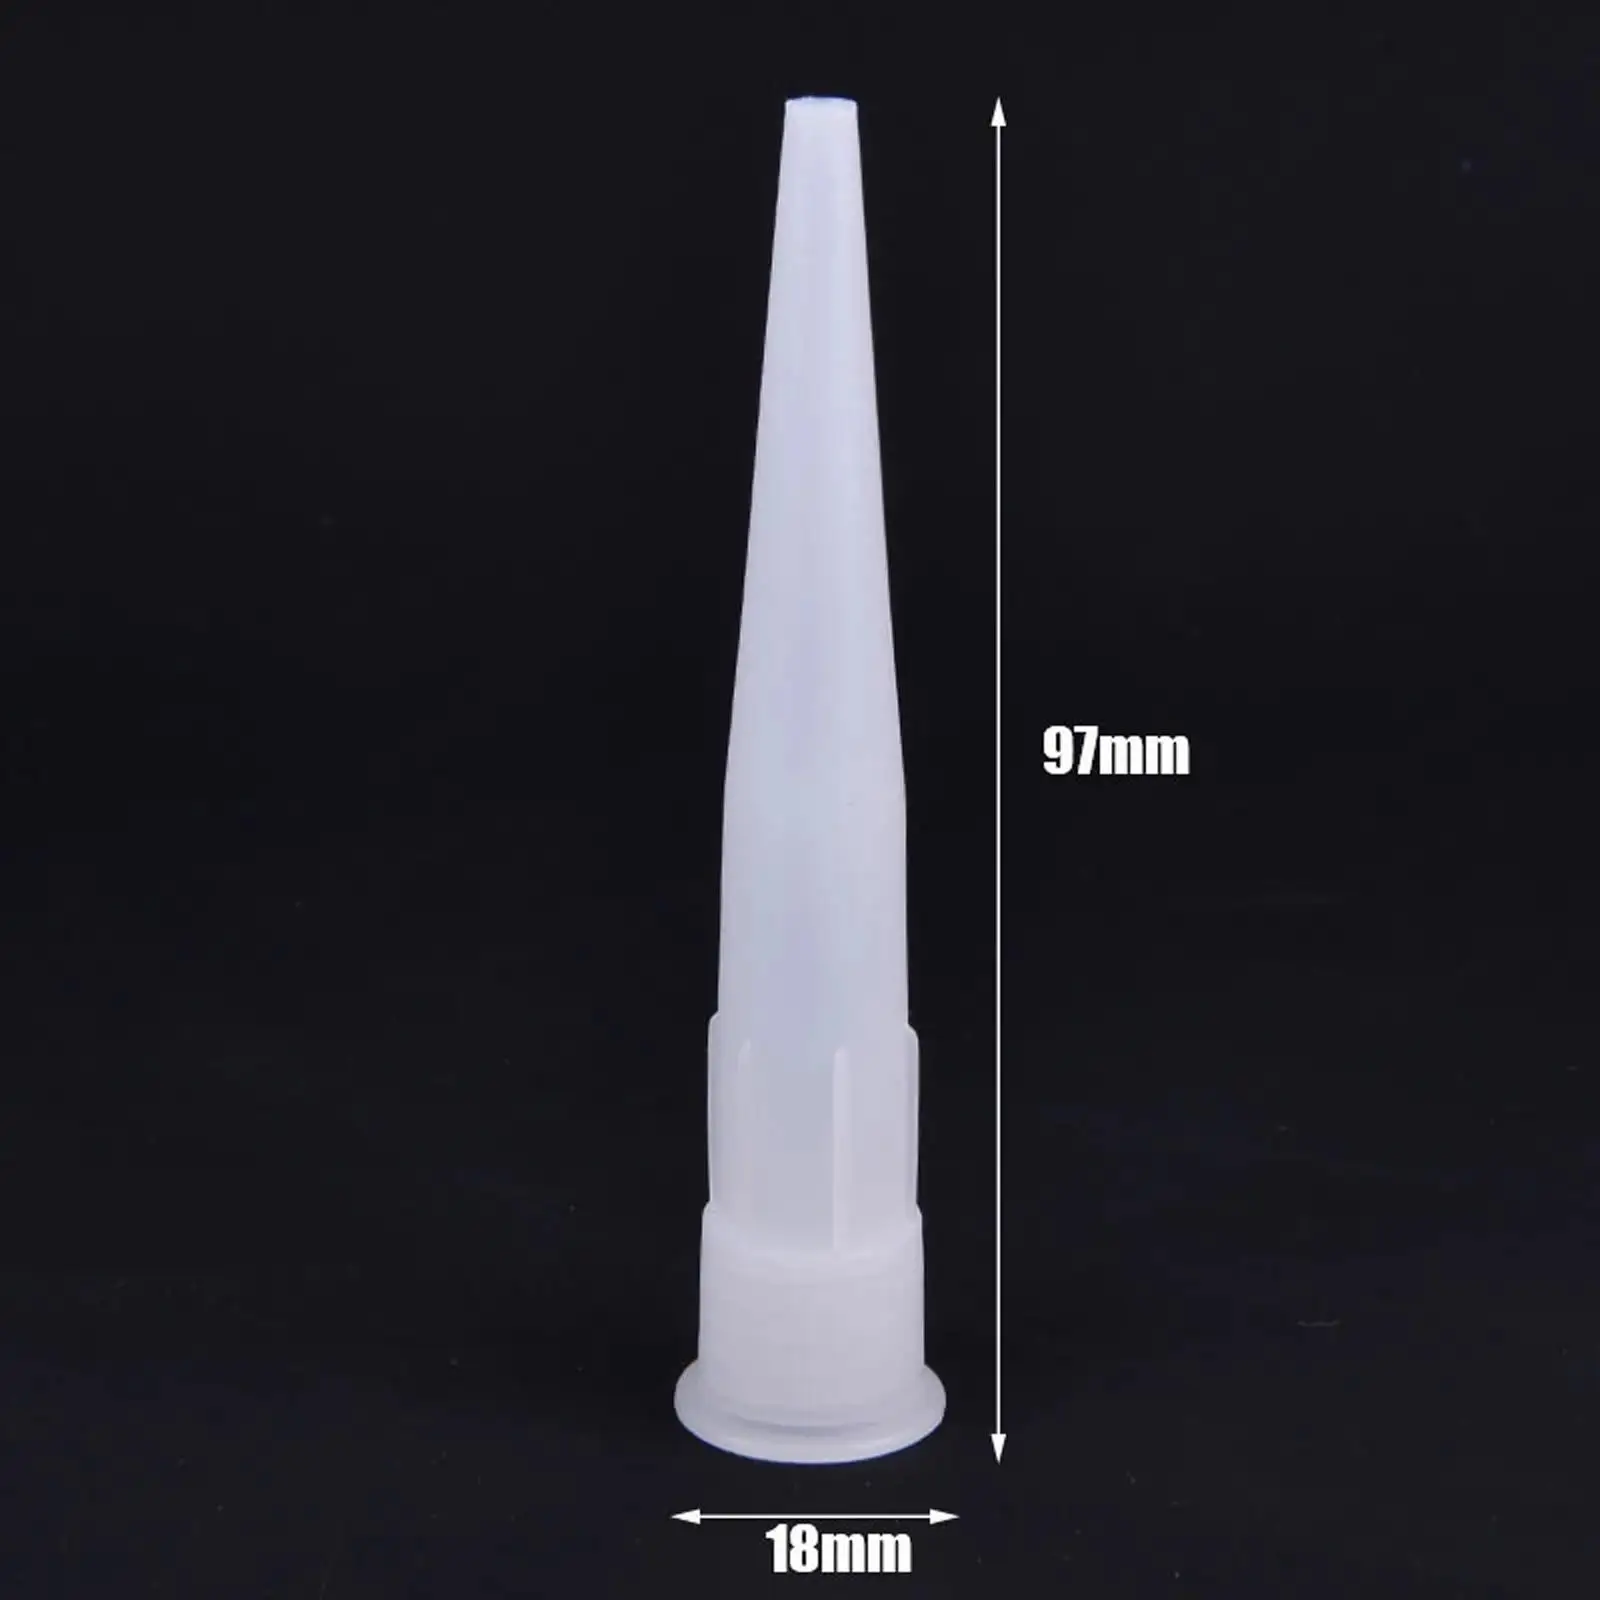 200x Caulking Finishing Nozzle Applicator Caulk Nozzle Replacement Glass Glue Tip Mouth Construction Tools for Home Accessories